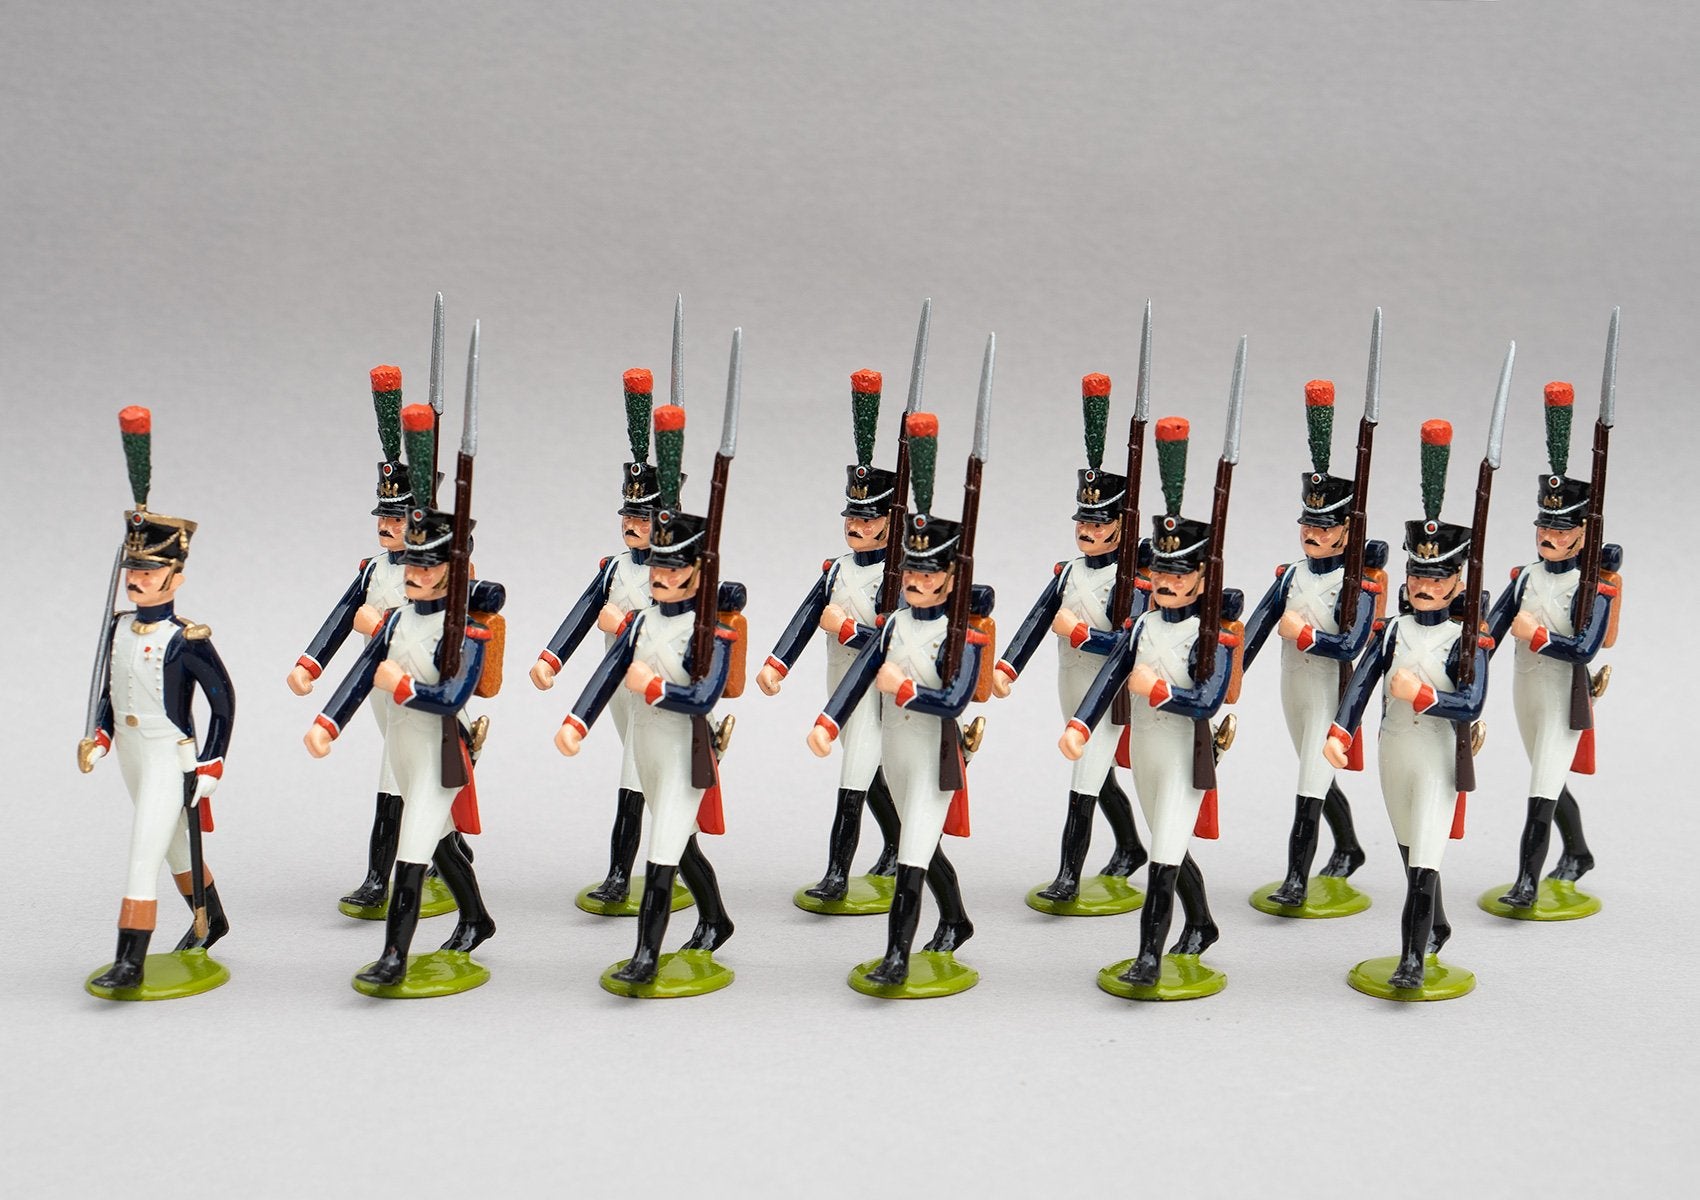 Set 124a Fusiliers-Chasseur | French Infantry | Napoleonic Wars | Combined sets 124 and 124a showing 12 Fusiliers | Waterloo | © Imperial Productions | Sculpt by David Cowe